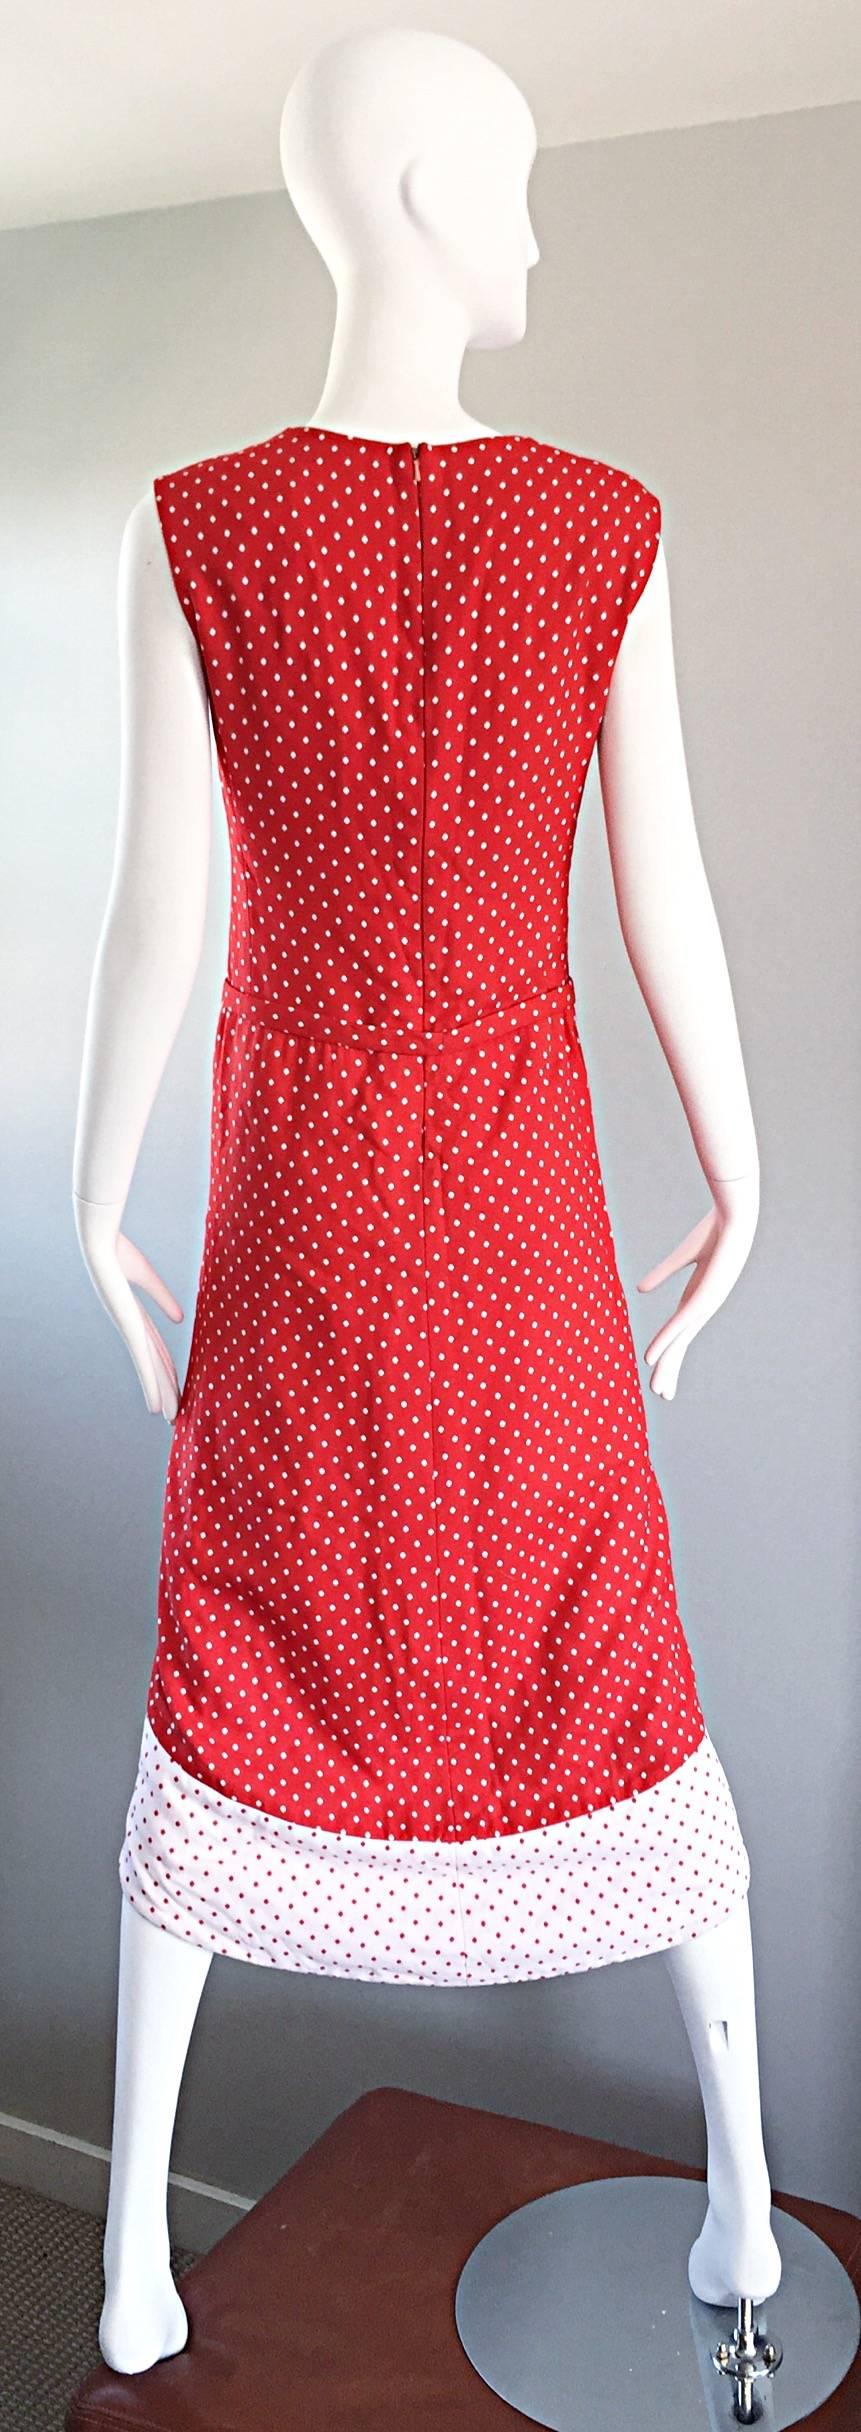 1960s Pierre Cardin Couture Vintage Space Age Red White Polka Dot Cut Out Dress In Excellent Condition For Sale In San Diego, CA